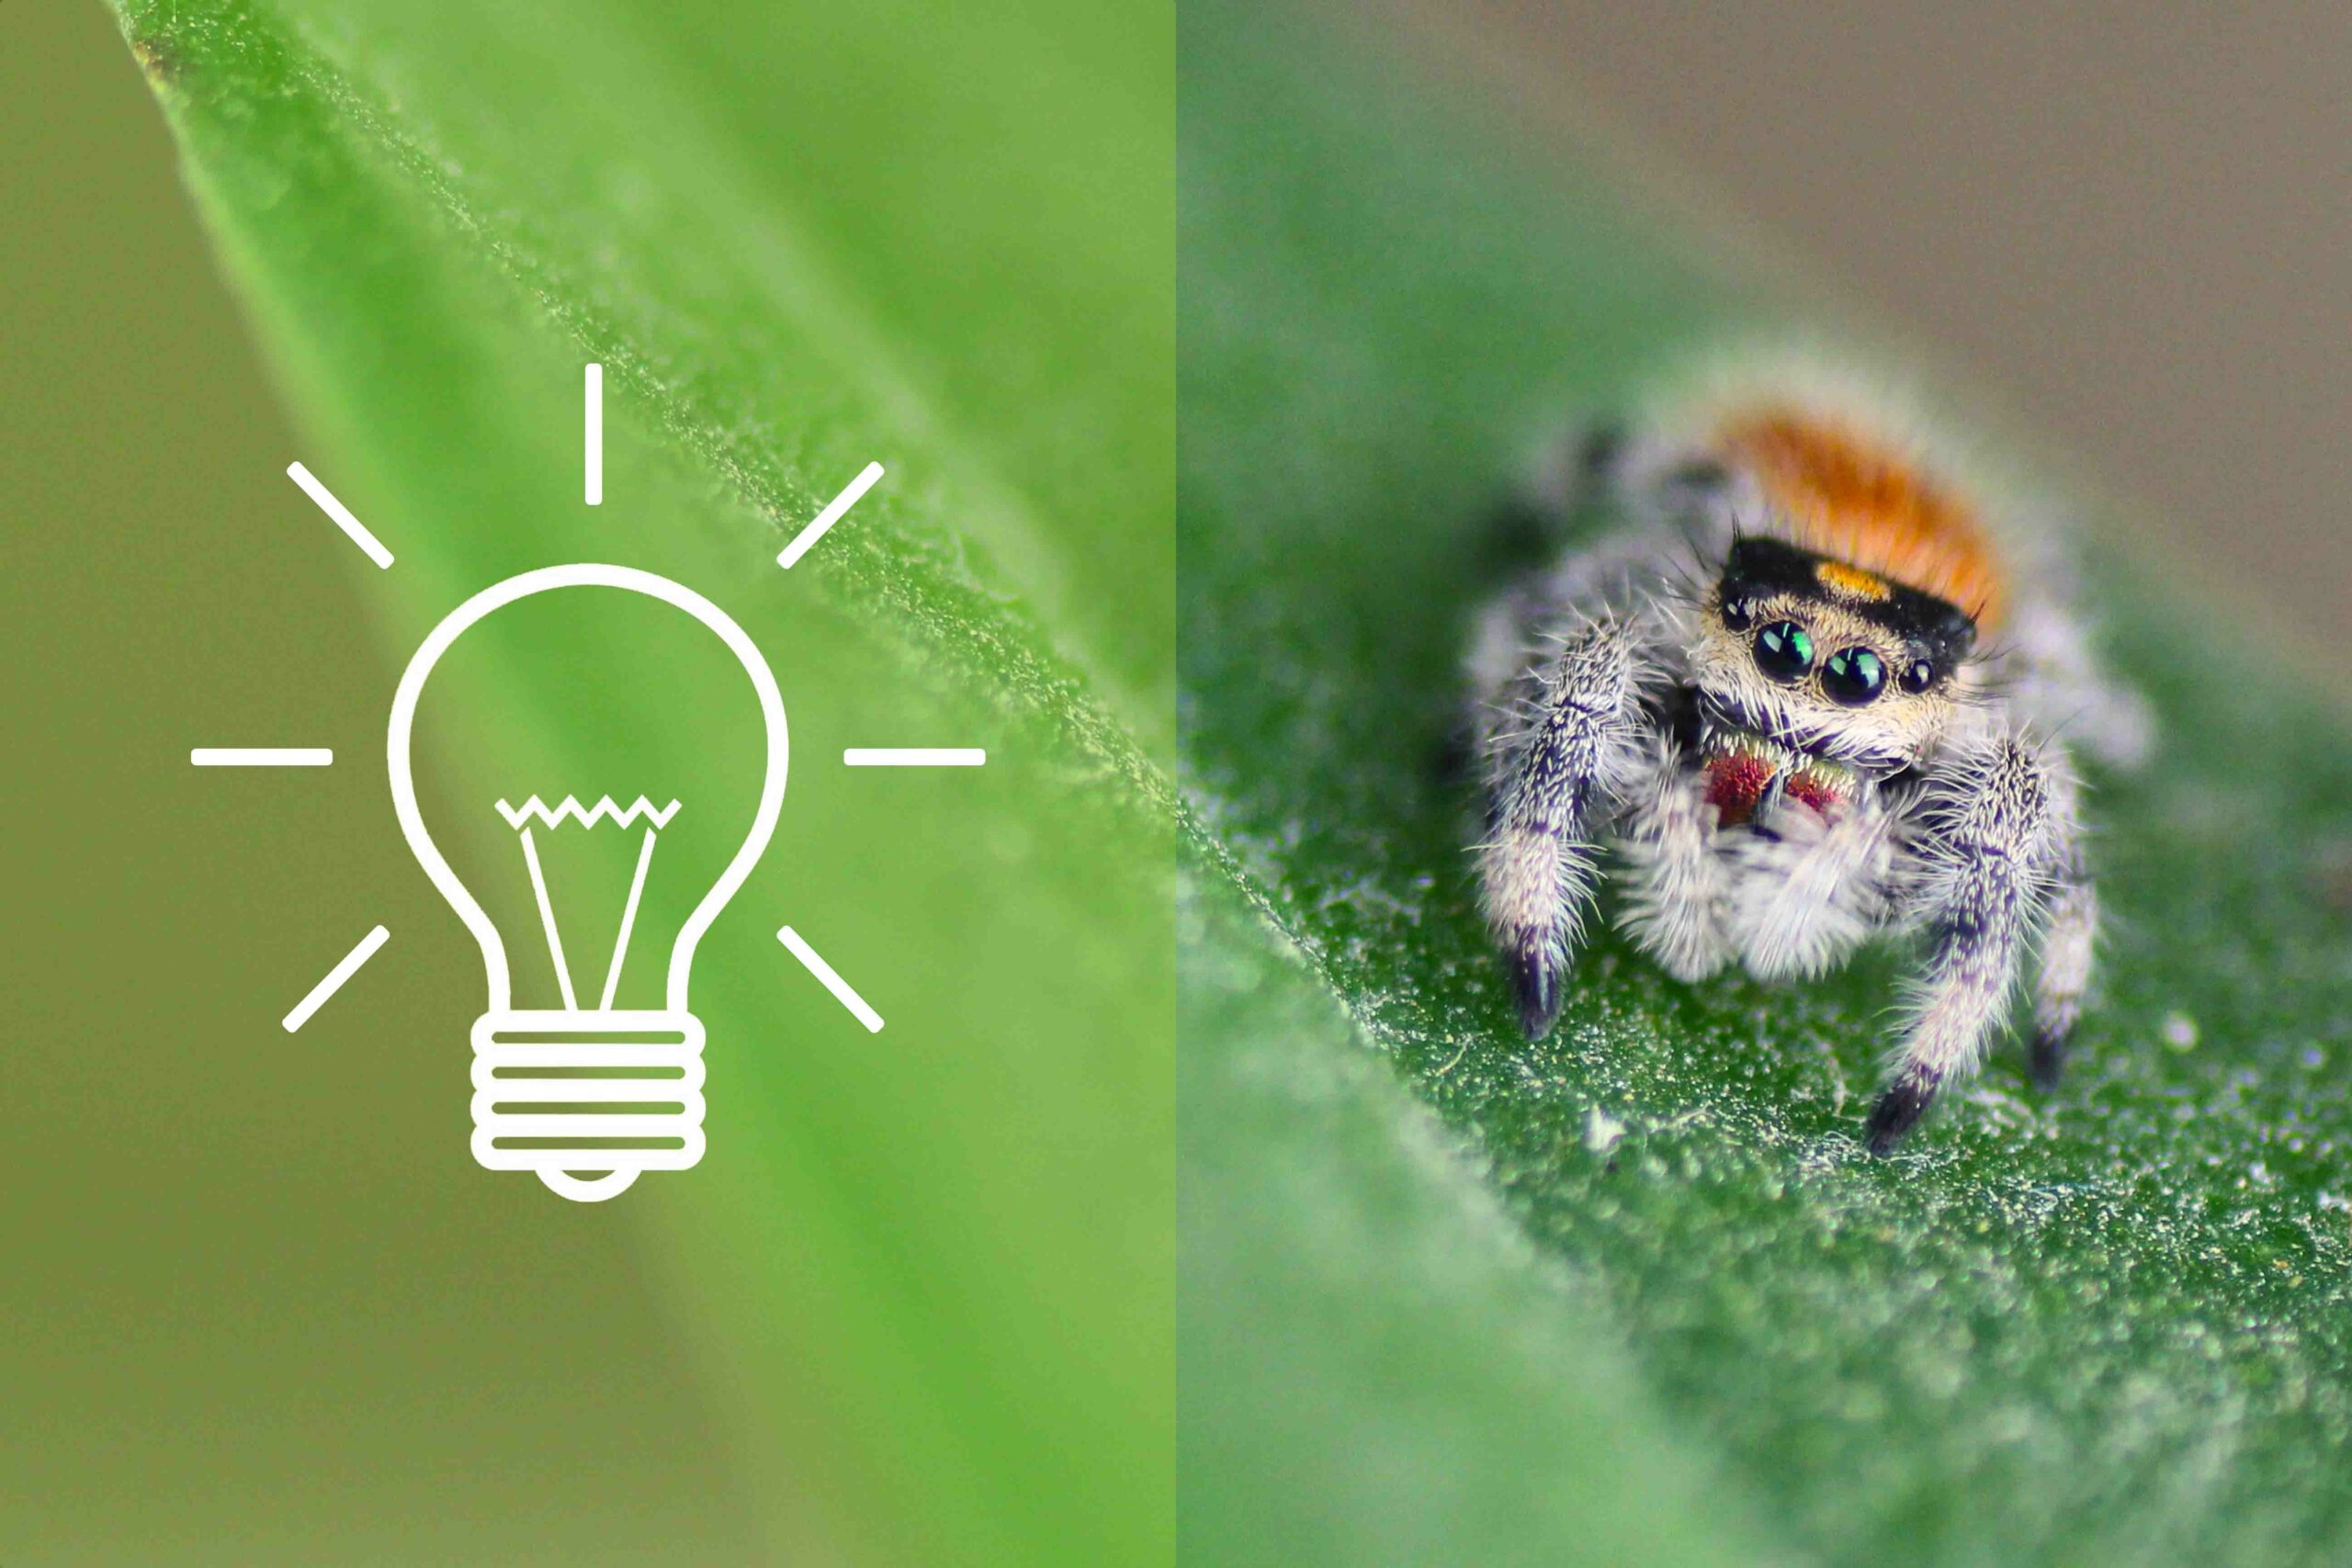 How jumping spiders became the new 'it' pets